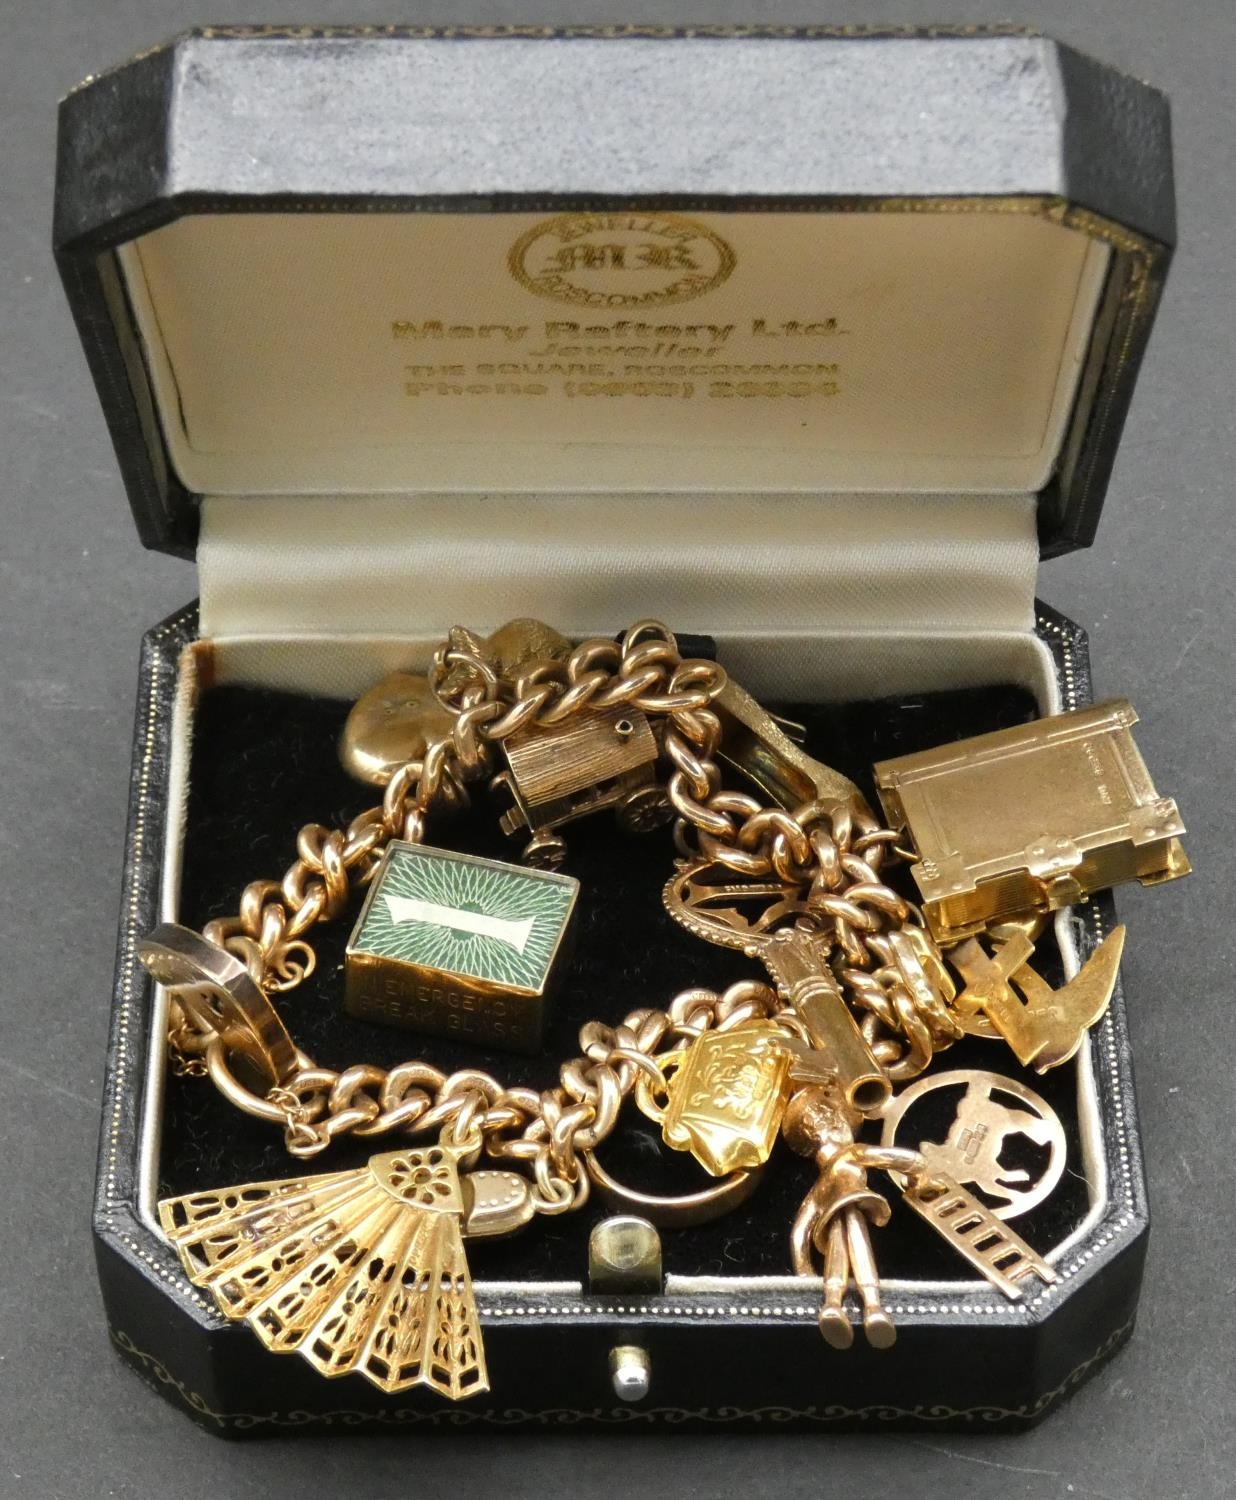 A vintage solid curb link 9ct gold charm bracelet with fifteen 9ct yellow gold charms. The charms